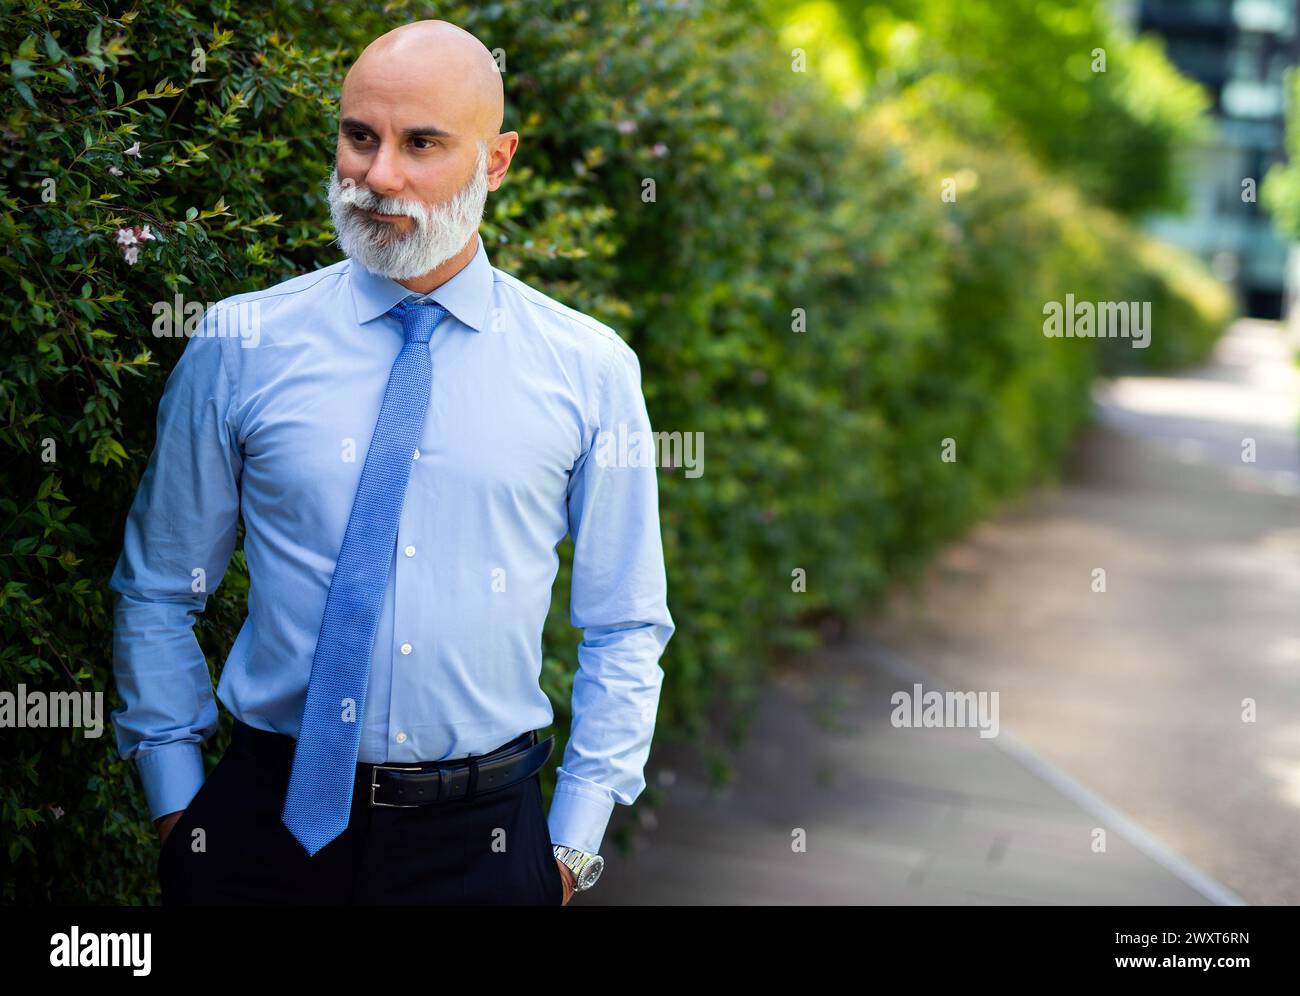 Mature bald stylish business man portrait with a white beard outdoor in a green city Stock Photo